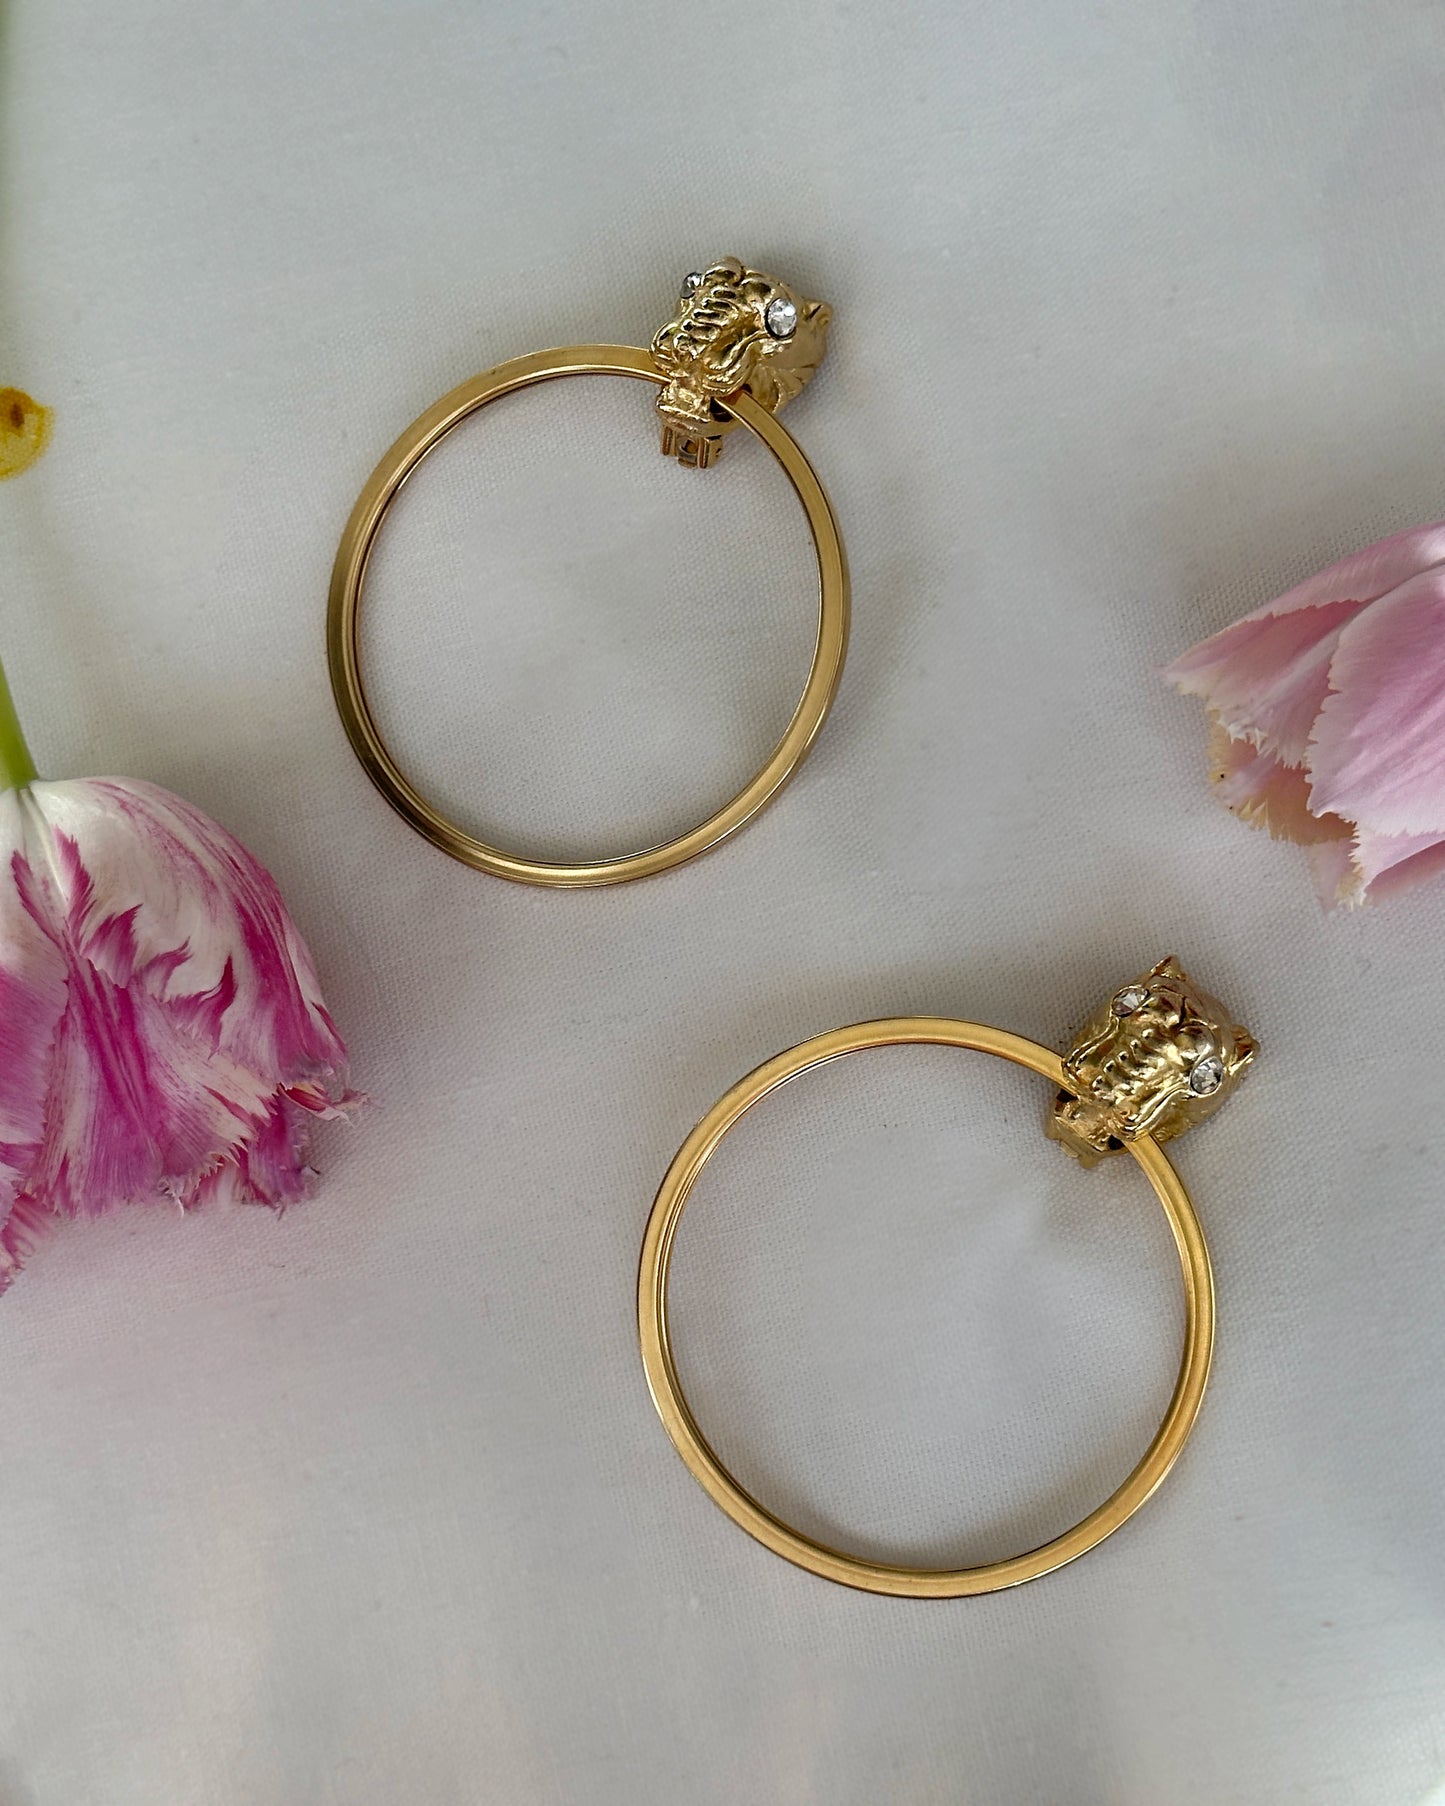 VINTAGE LARGE GOLD PANTHER HOOPS (attributed to Givenchy)